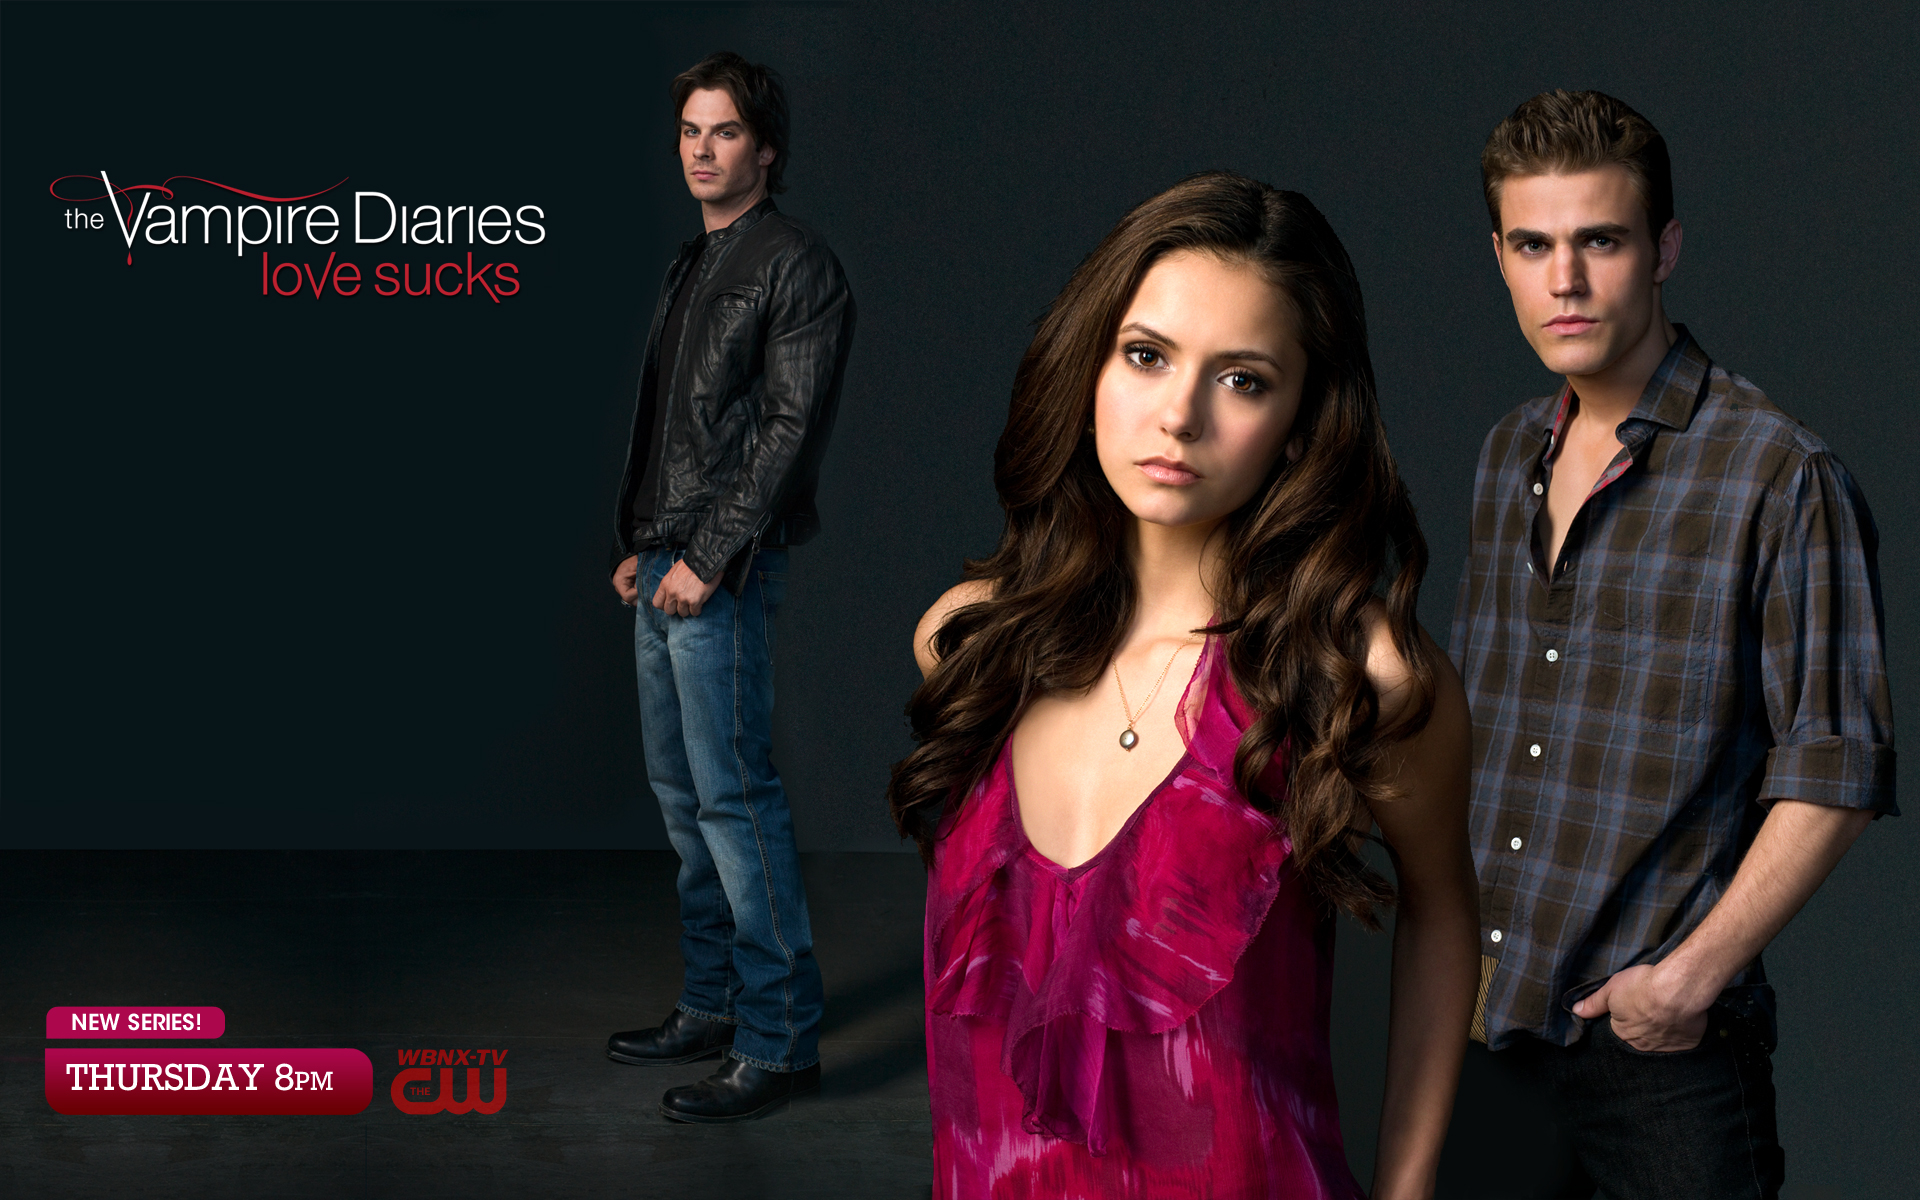 The Vampire Diaries S1 Cast Wbnx Tv Cleveland S Cw